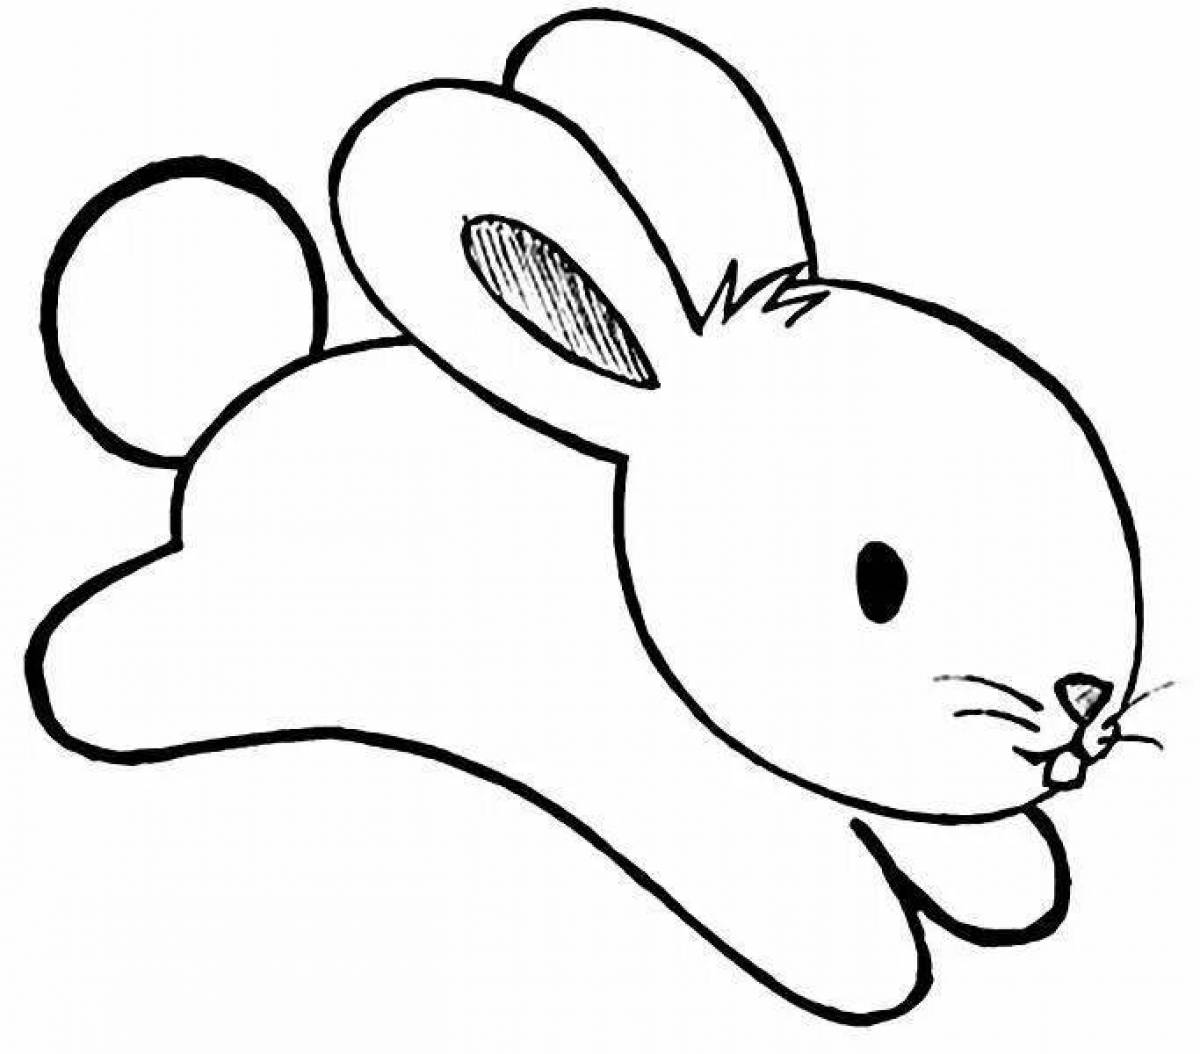 Great bunny coloring book for kids